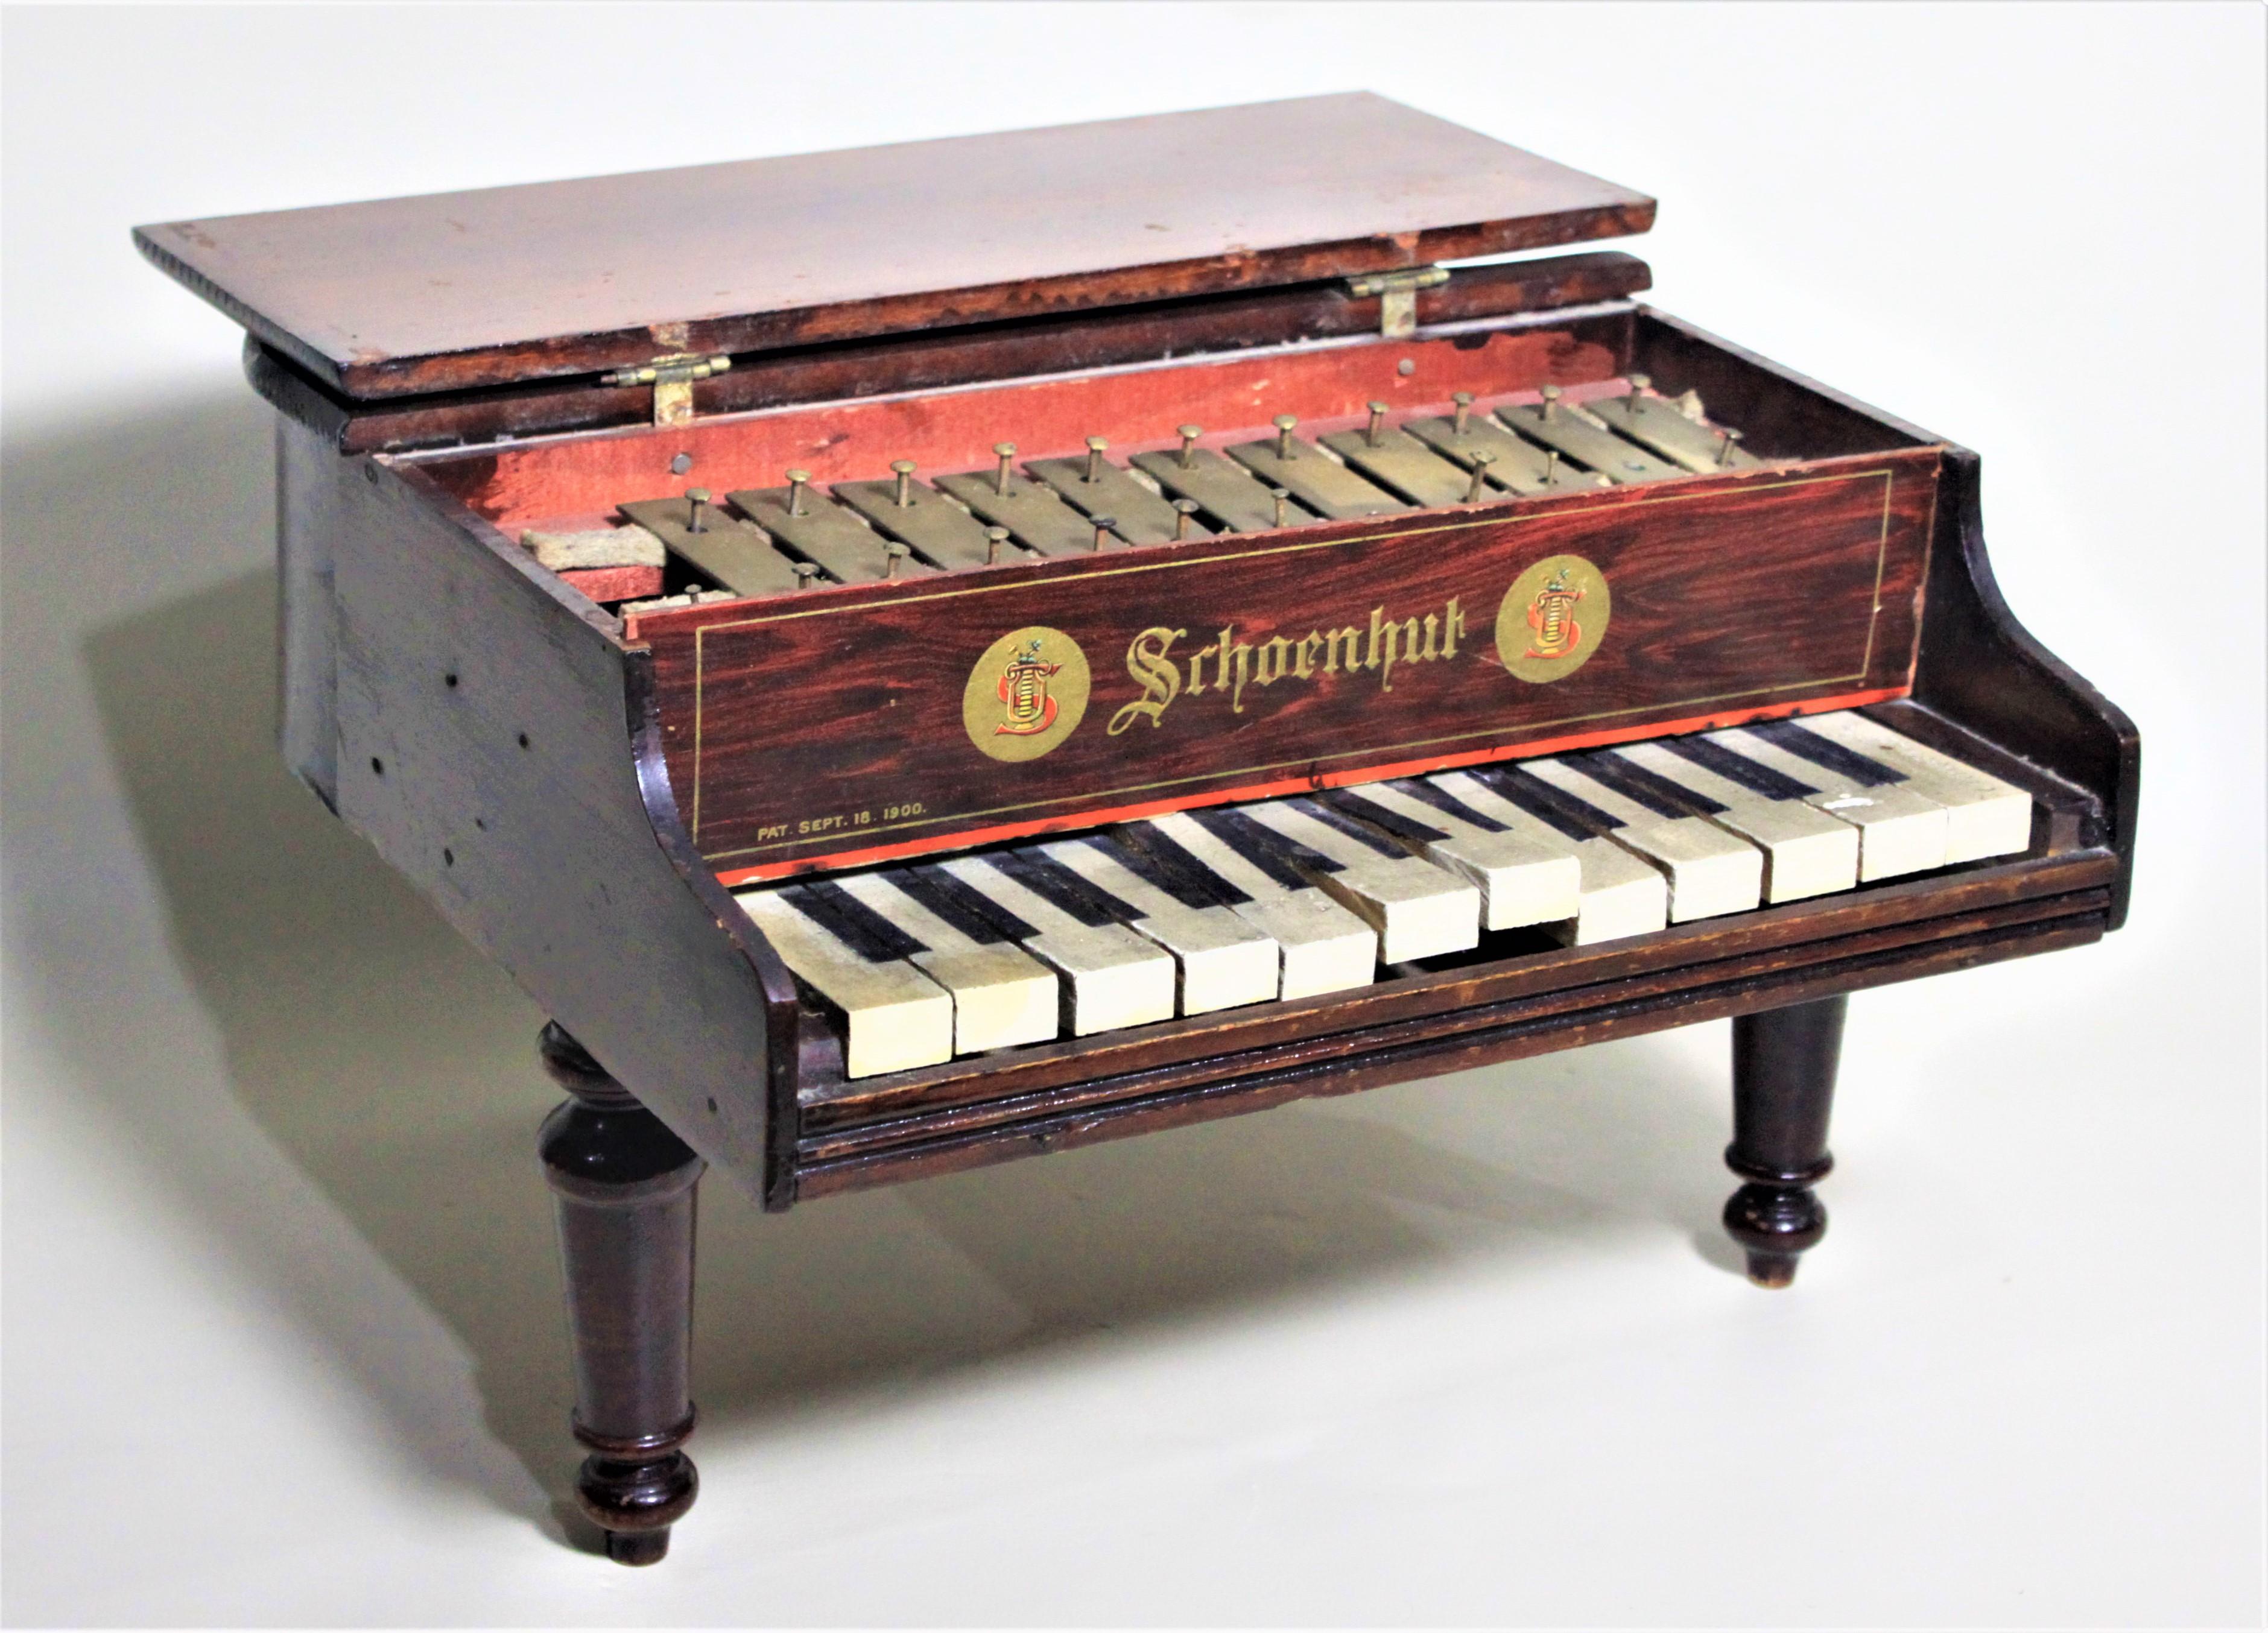 Made by the renowned American toy manufacturer in approximately 1920, this wooden toy baby grand piano has been autographed in two places by the legendary Liberace. The piano shows one signature on the bottom which is dated May 1954 or 1955 as the